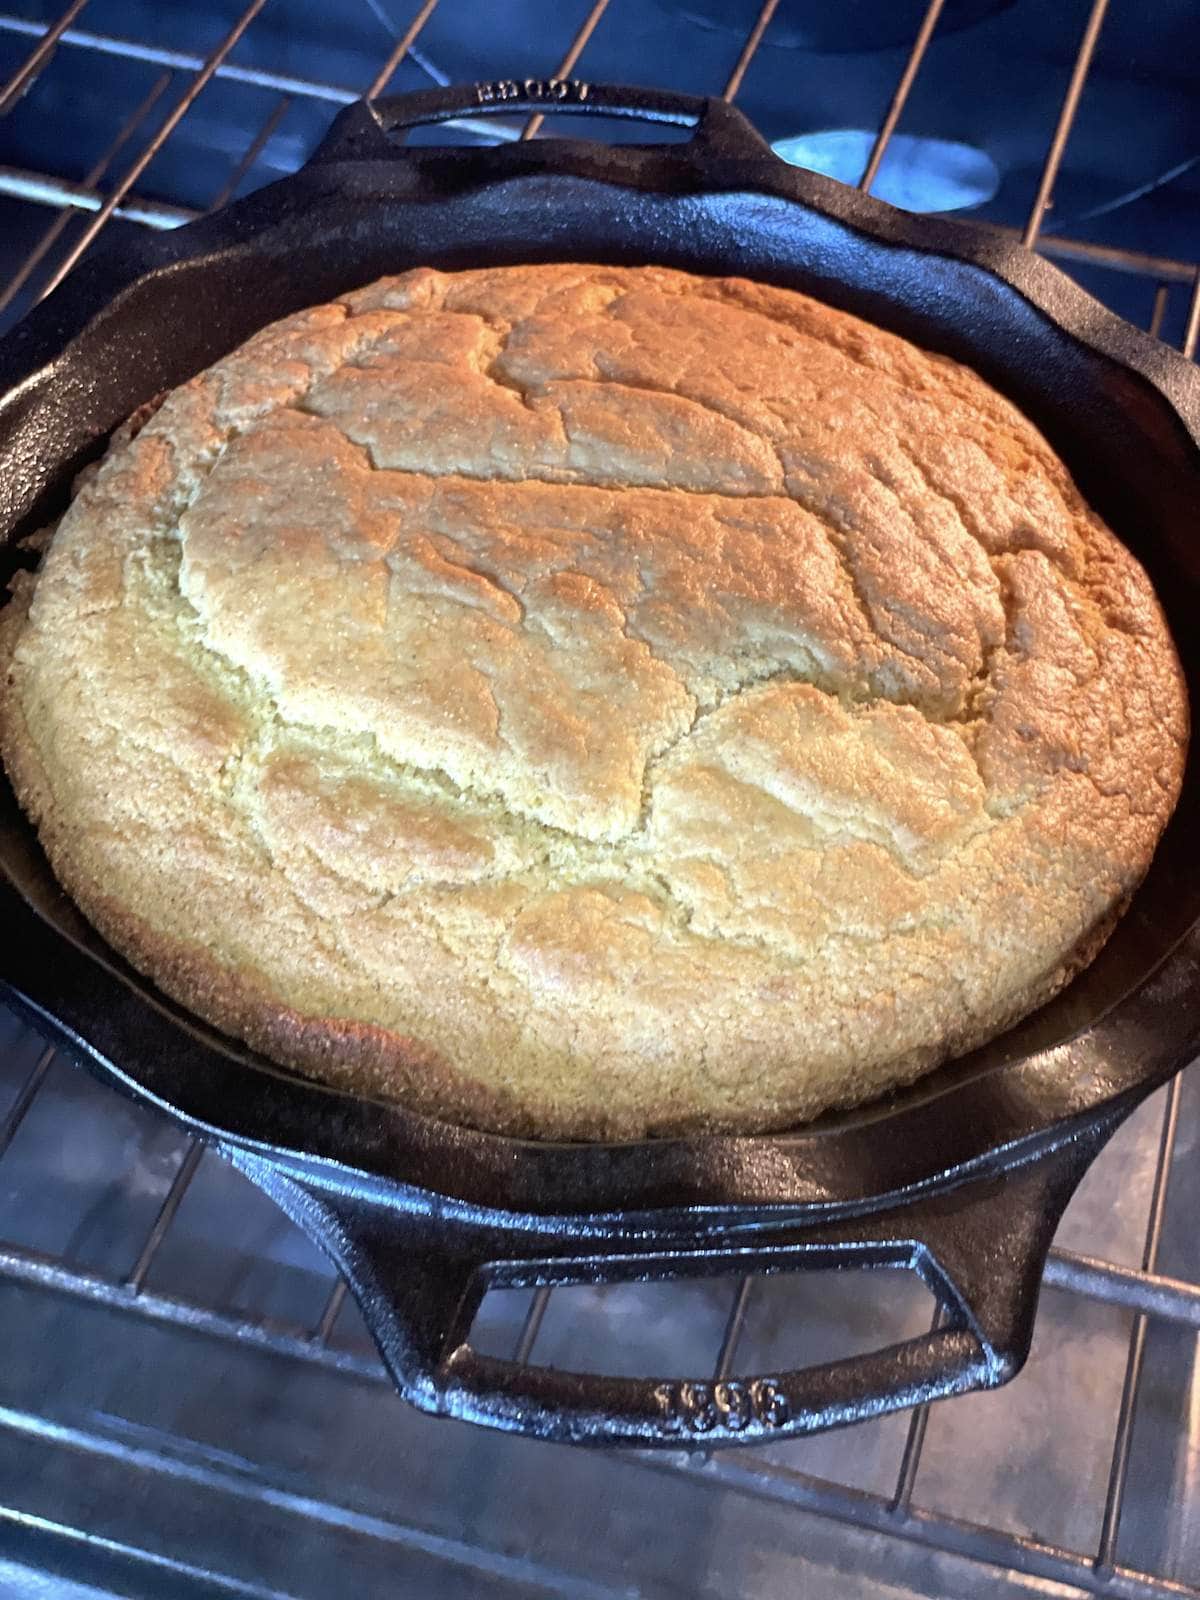 Southern cornbread in a cast iron pan, freshly baked, being removed from the oven.